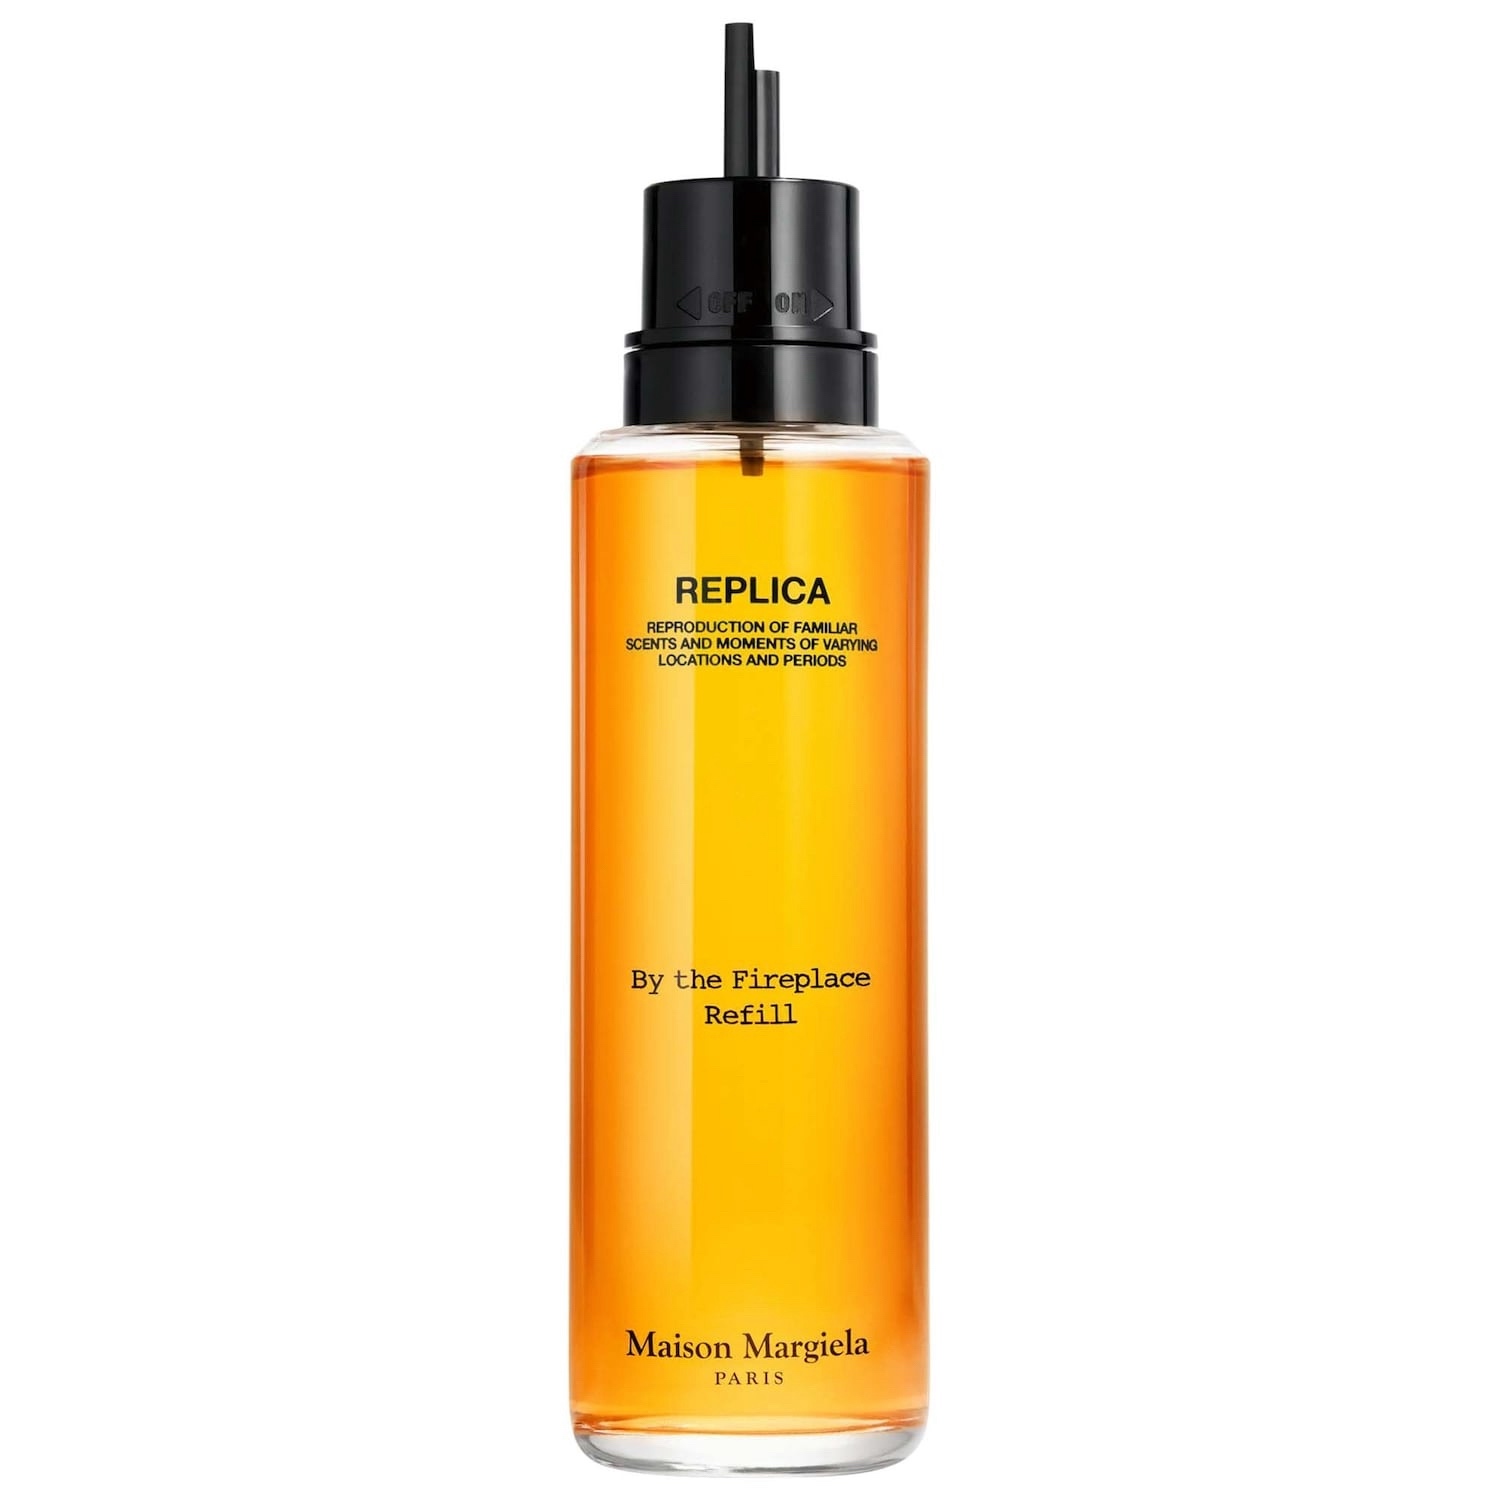 'REPLICA' By the Fireplace Maison Margiela Refill